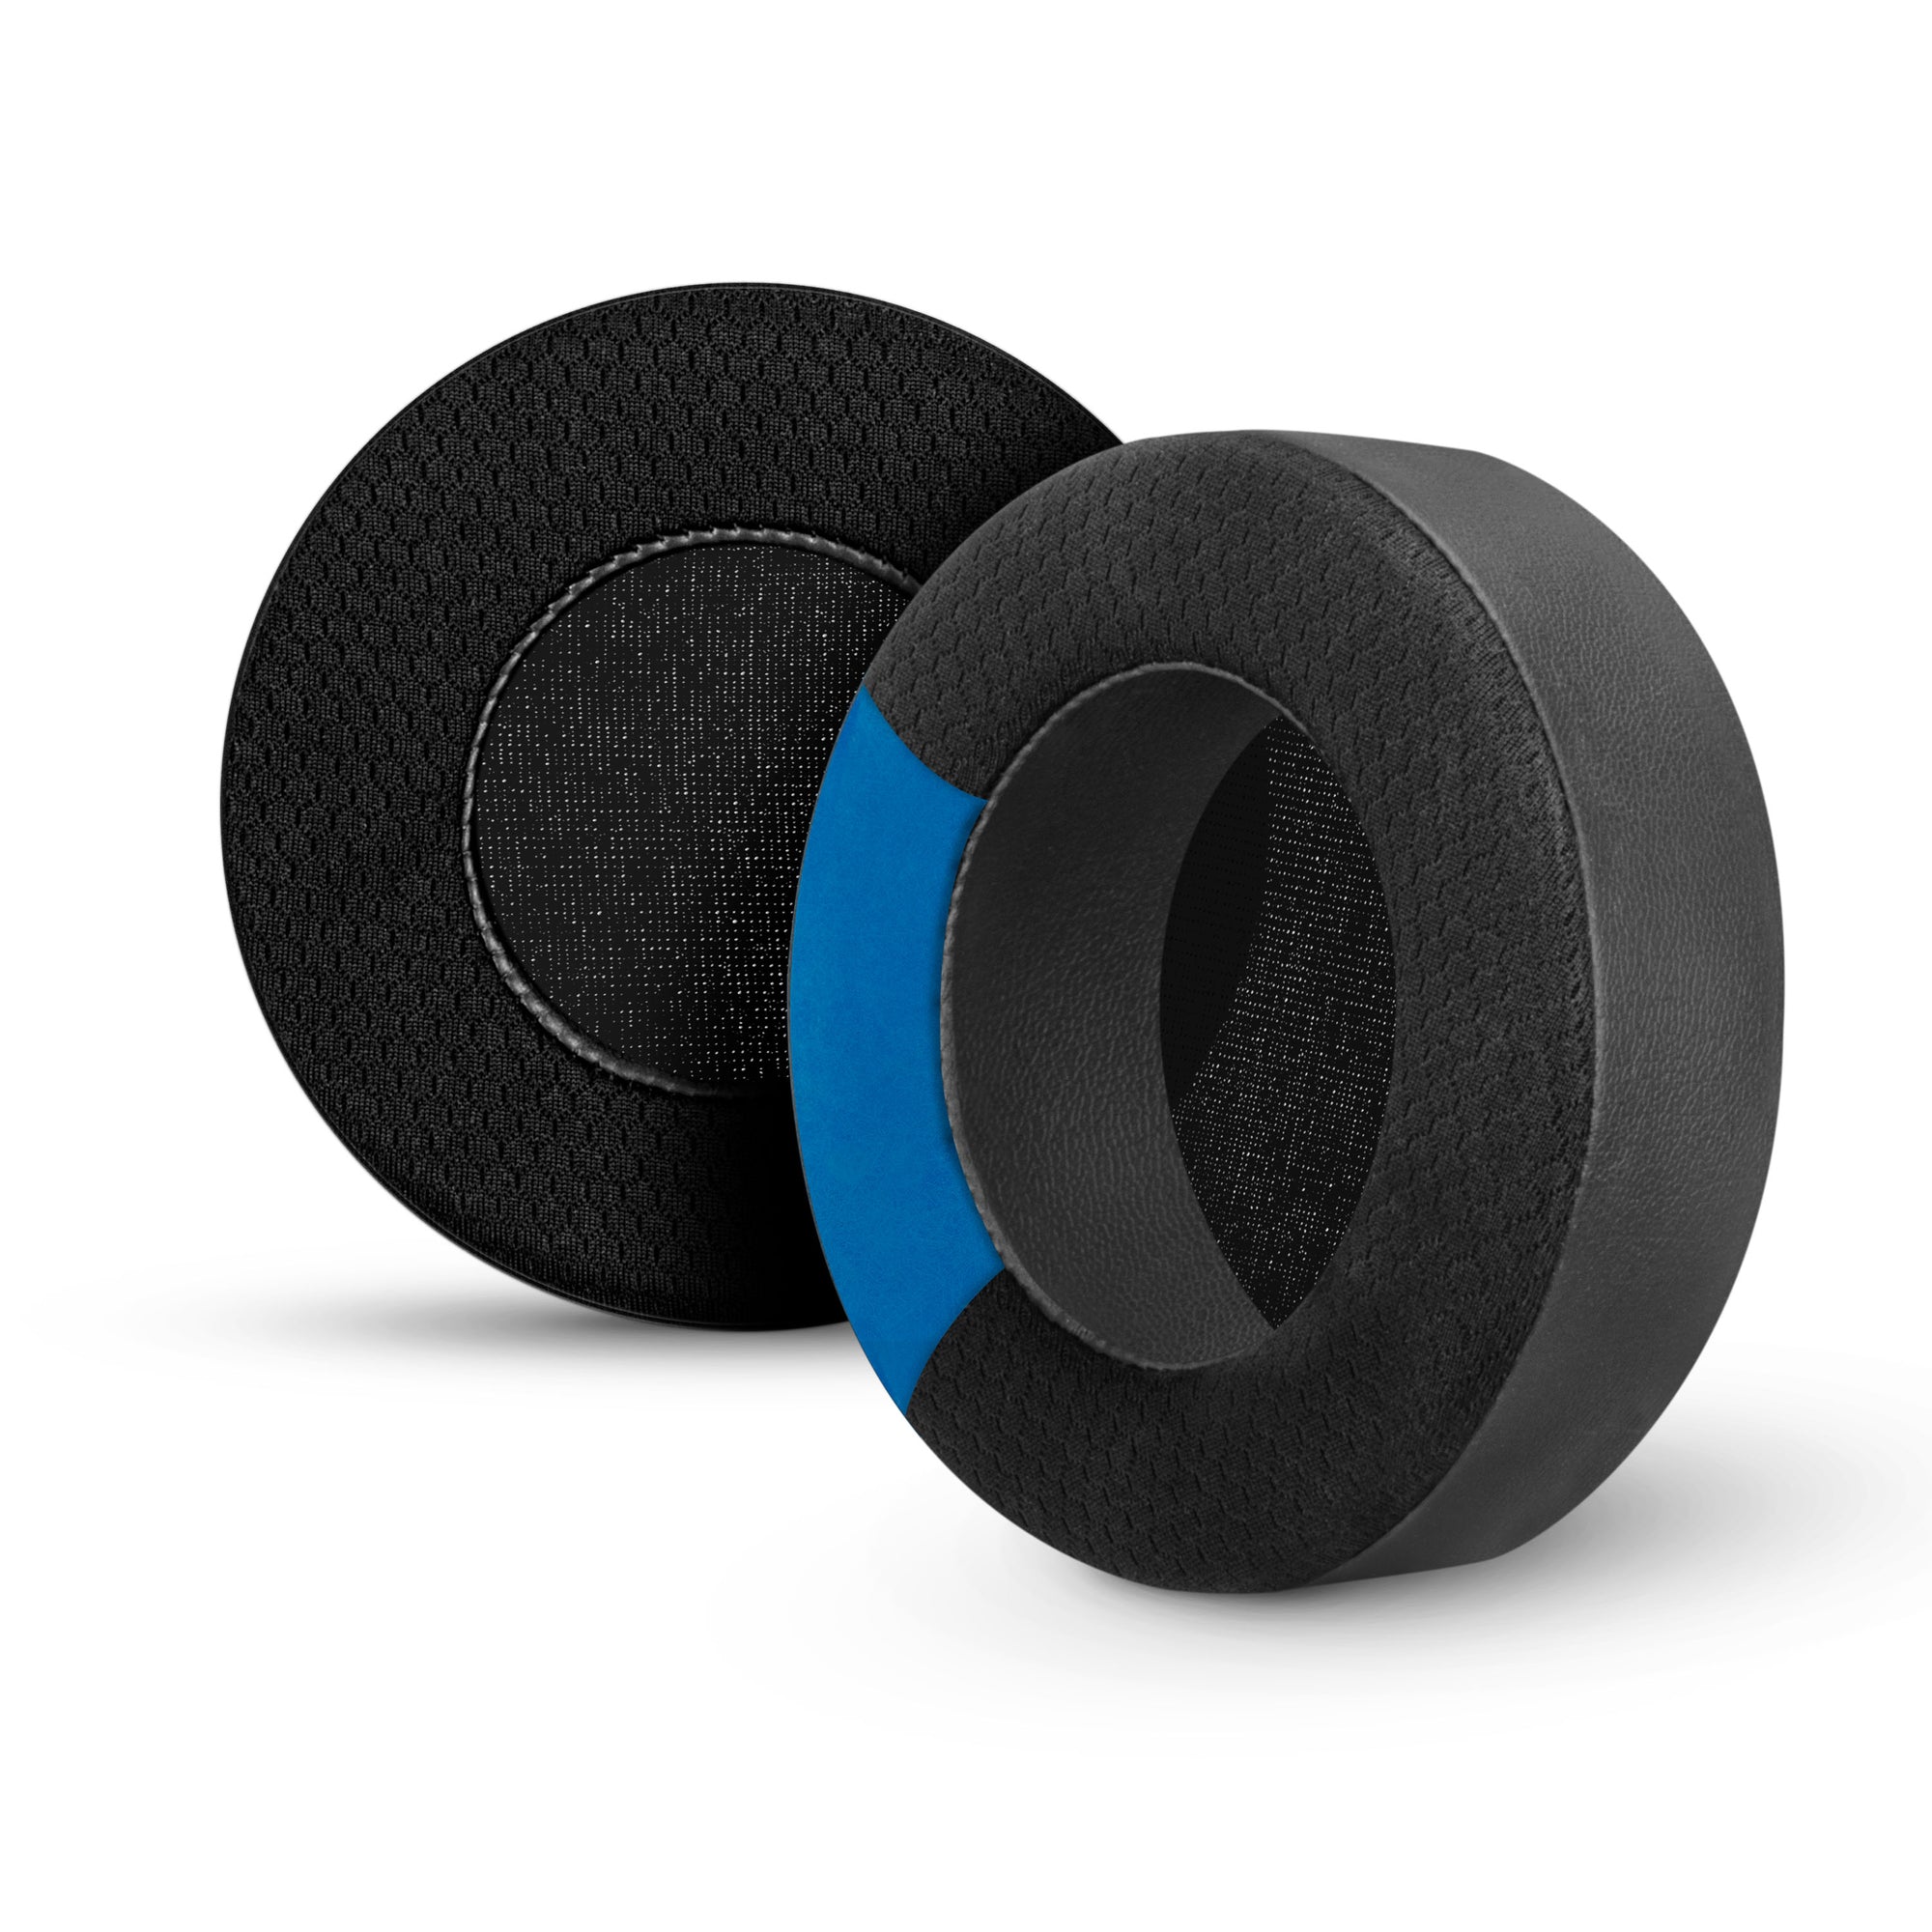 Hybrid Replacement Earpads for Corsair Virtuoso Gaming Headset (Wireless/XT/SE) - Cooling Gel, Memory Foam, Durable, Thick & Sound Isolating